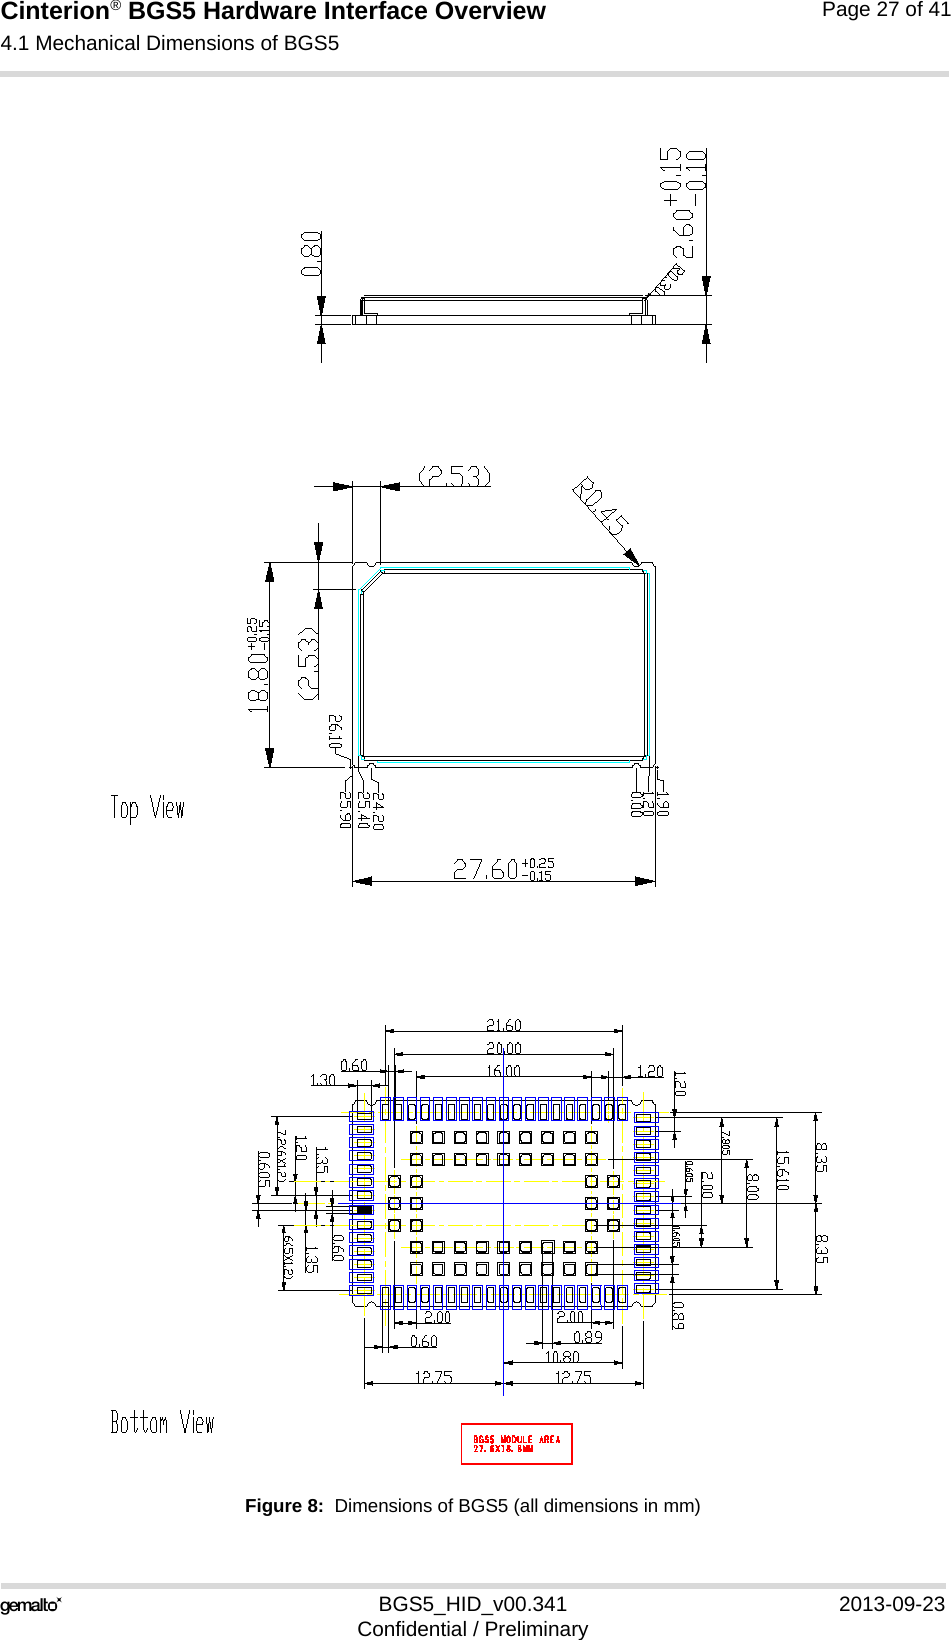 Cinterion® BGS5 Hardware Interface Overview4.1 Mechanical Dimensions of BGS527BGS5_HID_v00.341 2013-09-23Confidential / PreliminaryPage 27 of 41Figure 8:  Dimensions of BGS5 (all dimensions in mm)